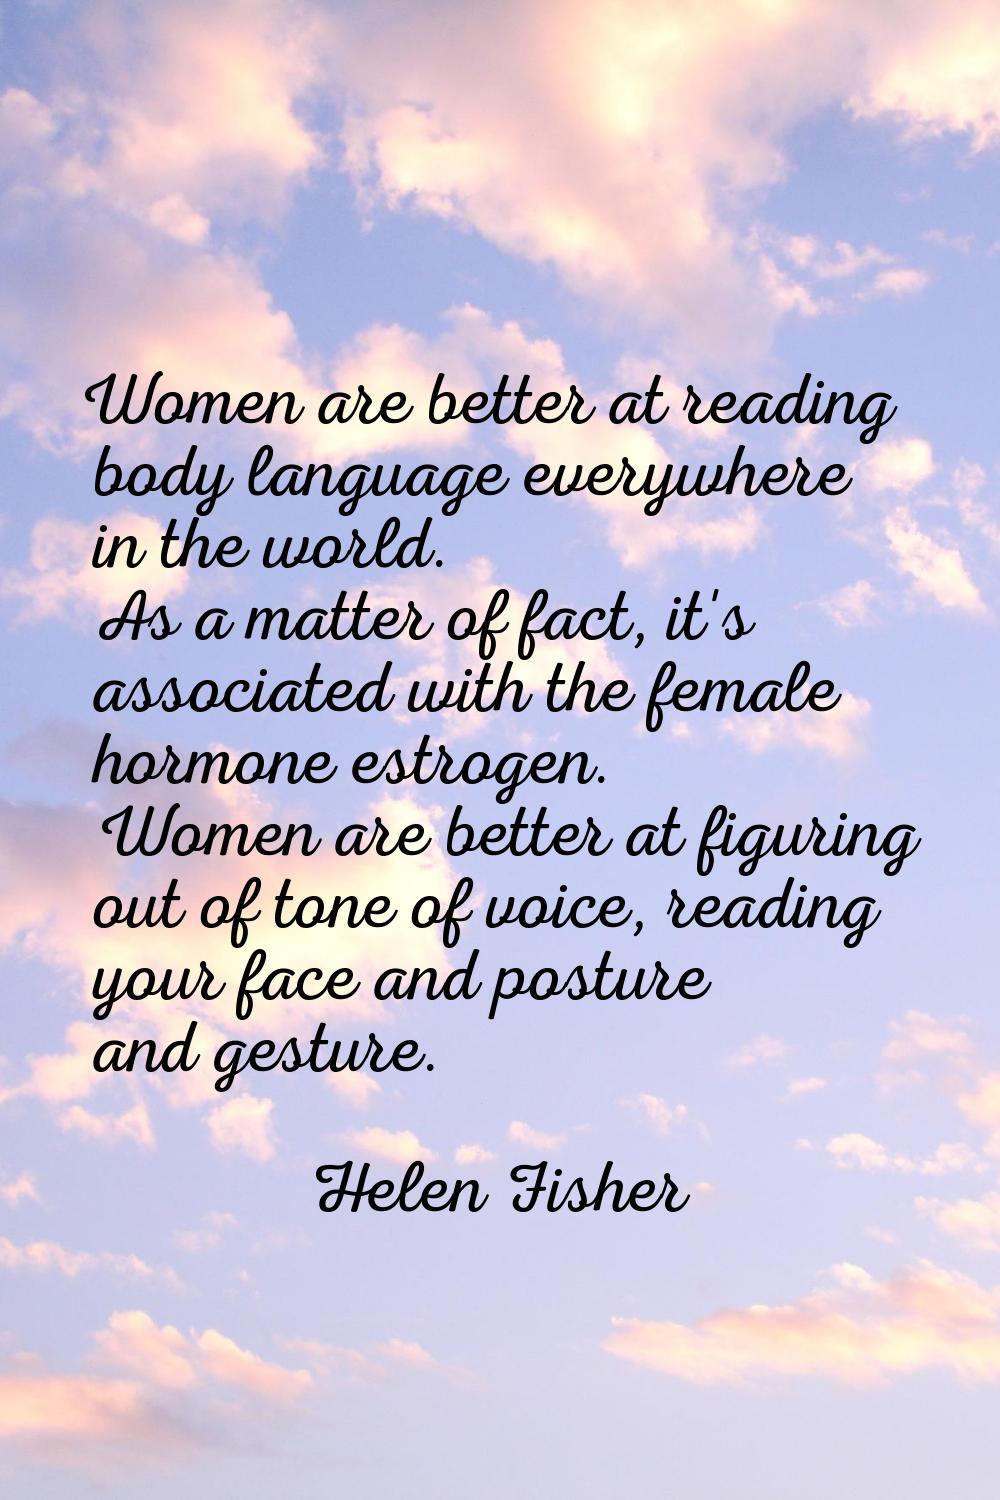 Women are better at reading body language everywhere in the world. As a matter of fact, it's associ